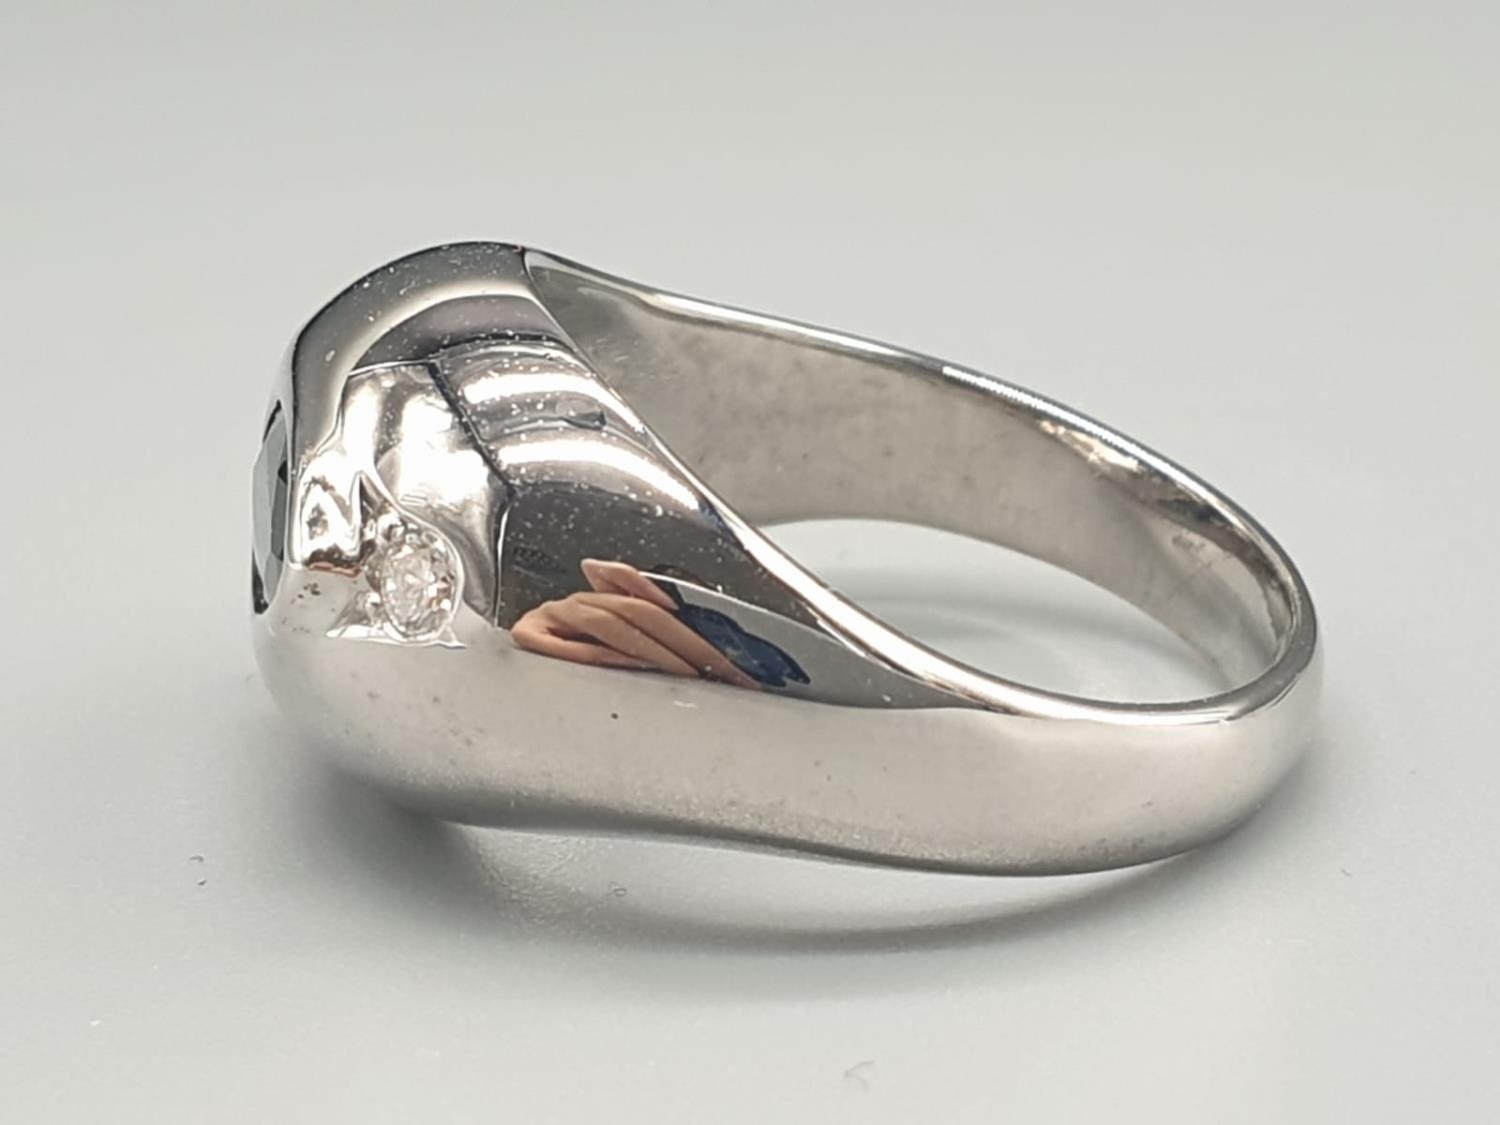 A MODERN STYLE 18K WHITE GOLD RING WITH CENTRAL SAPHIRE AND FLANKED BY DIAMONDS. 9.9gms SIZE M. - Image 3 of 6